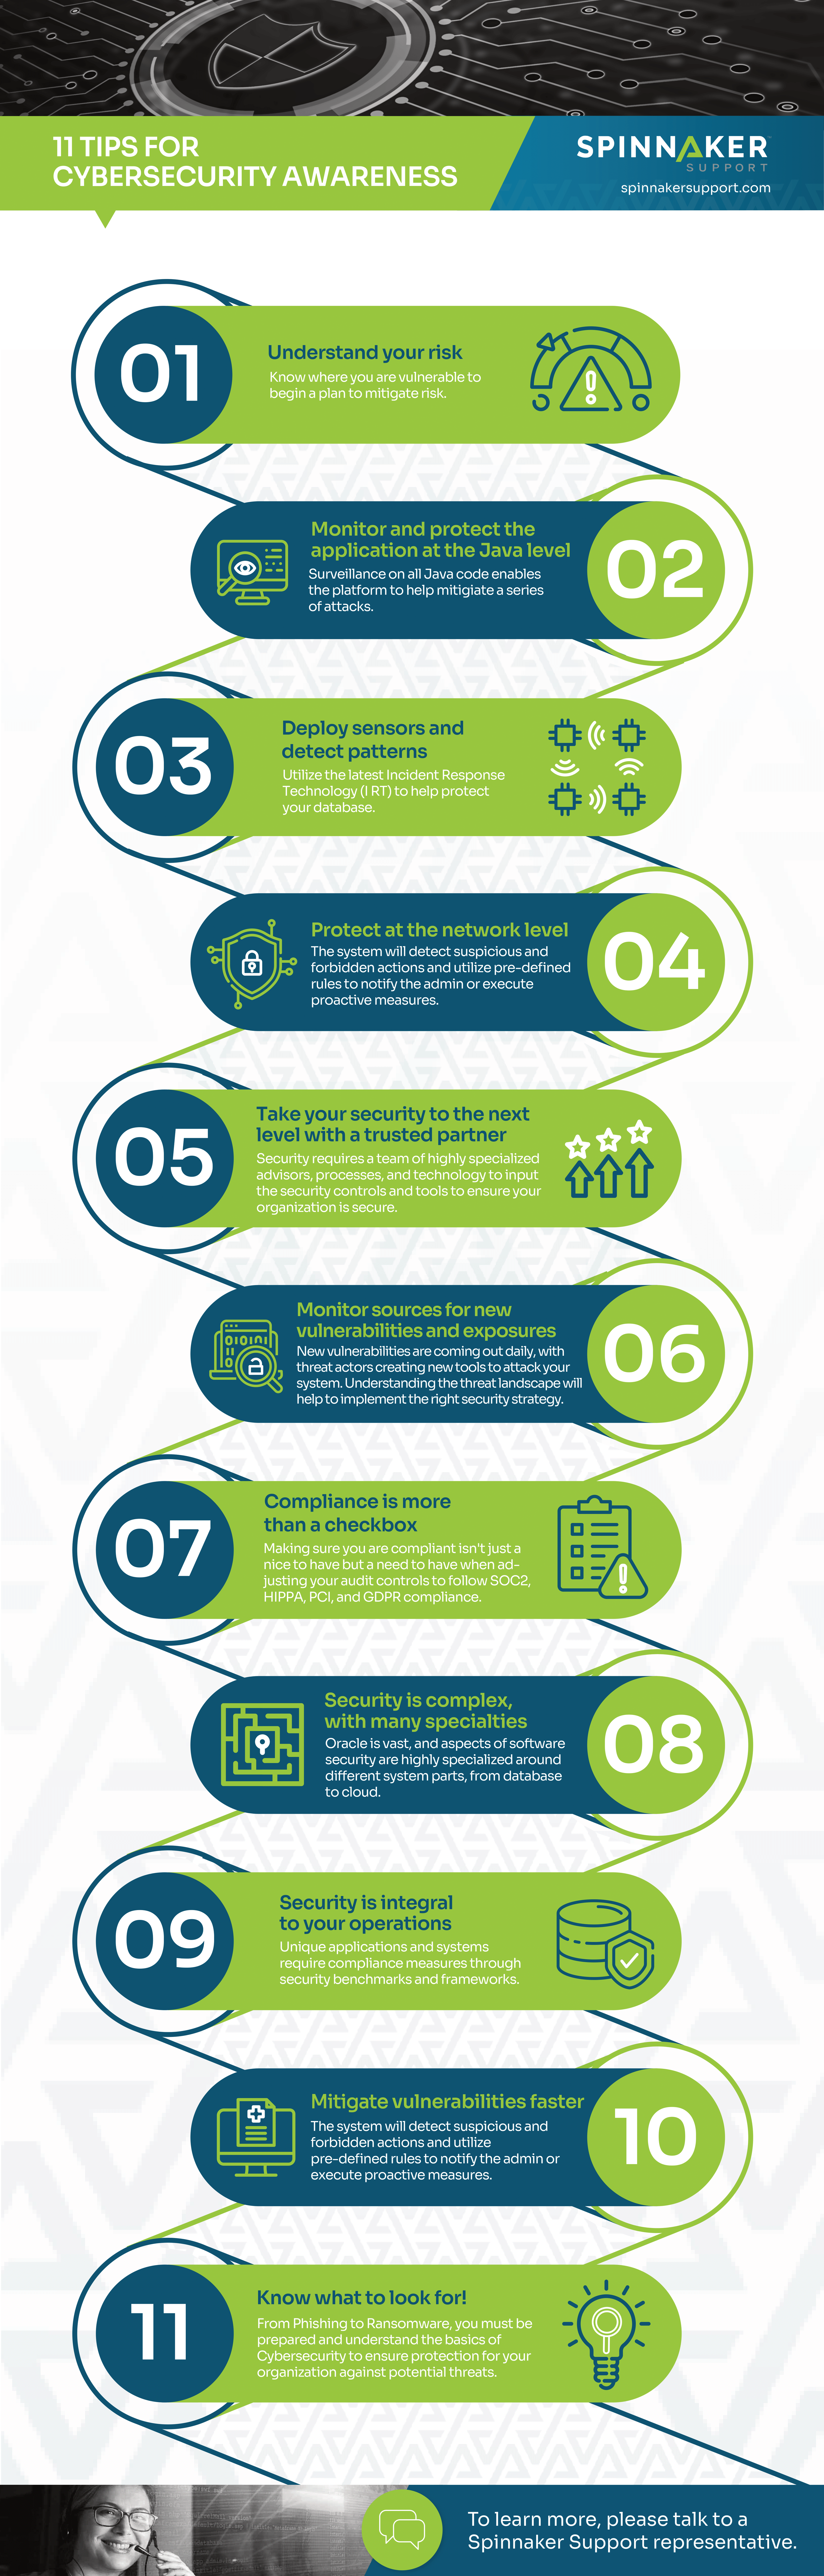 11 Tips For Cyber Security Awareness Infographic